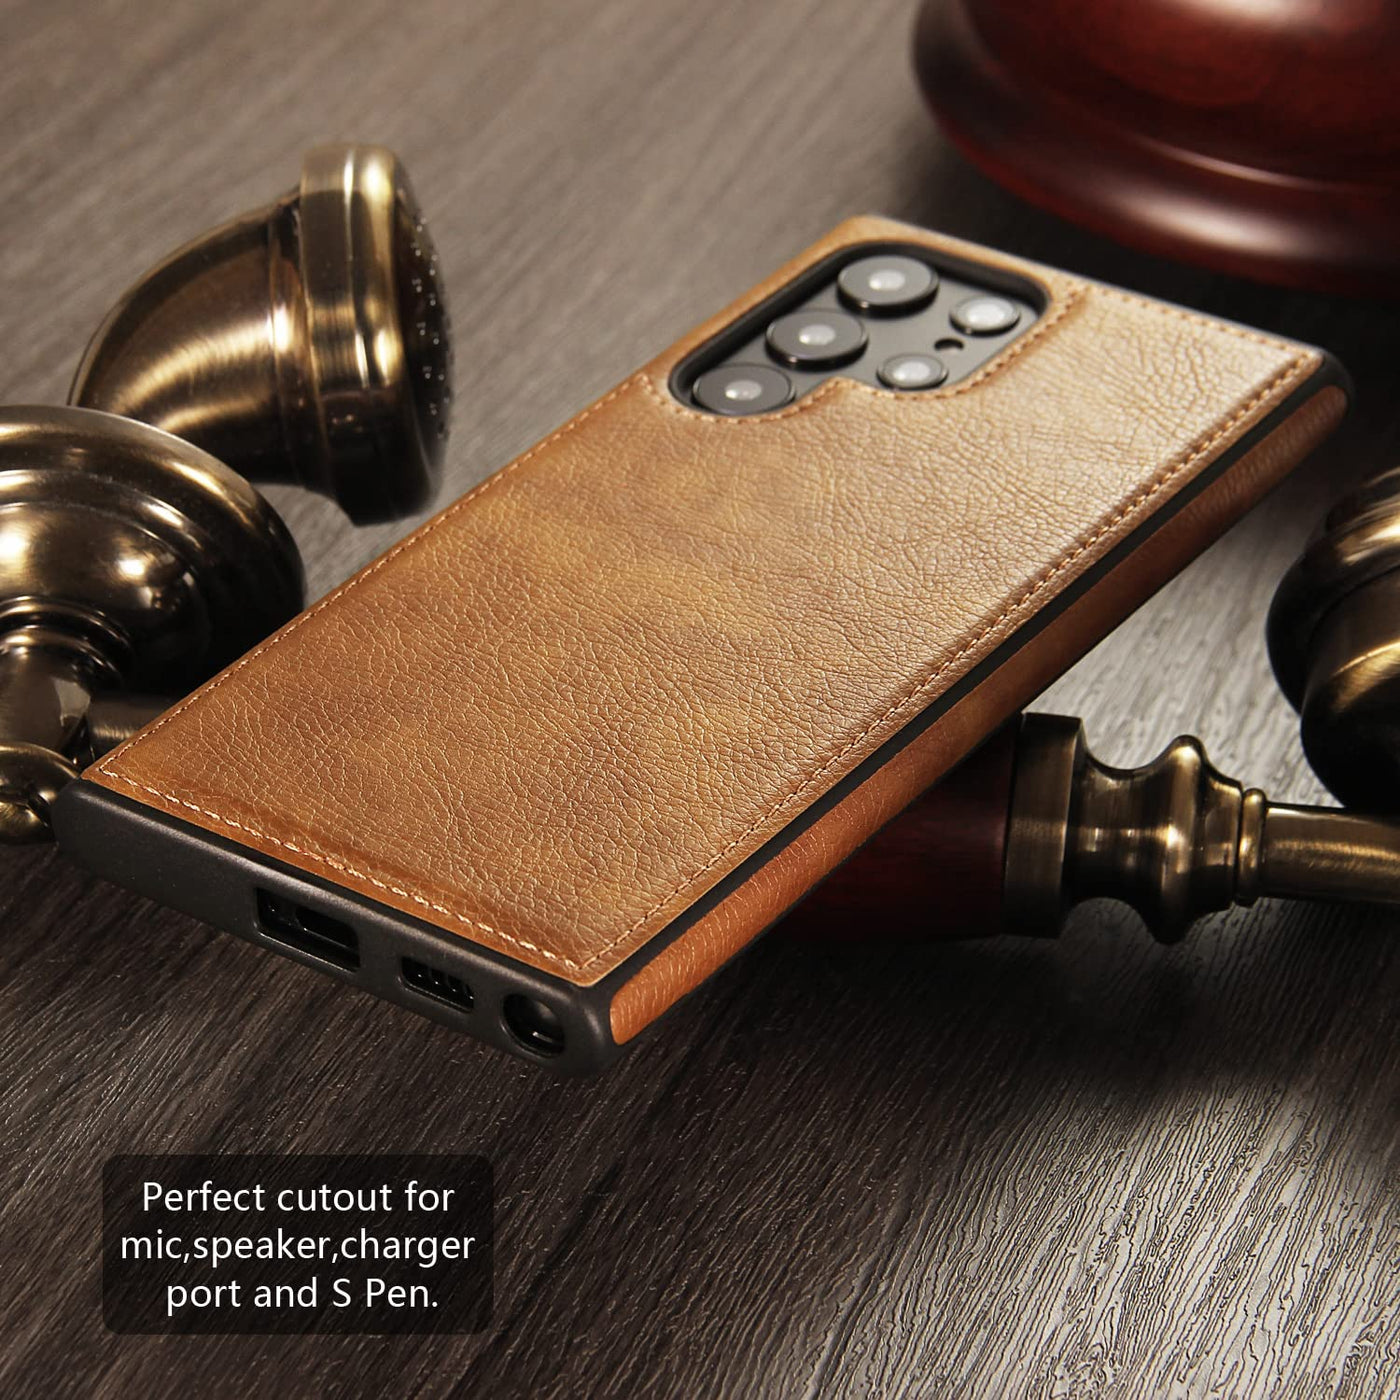 Samsung Galaxy S22 Ultra high quality premium and unique designer leather case cover